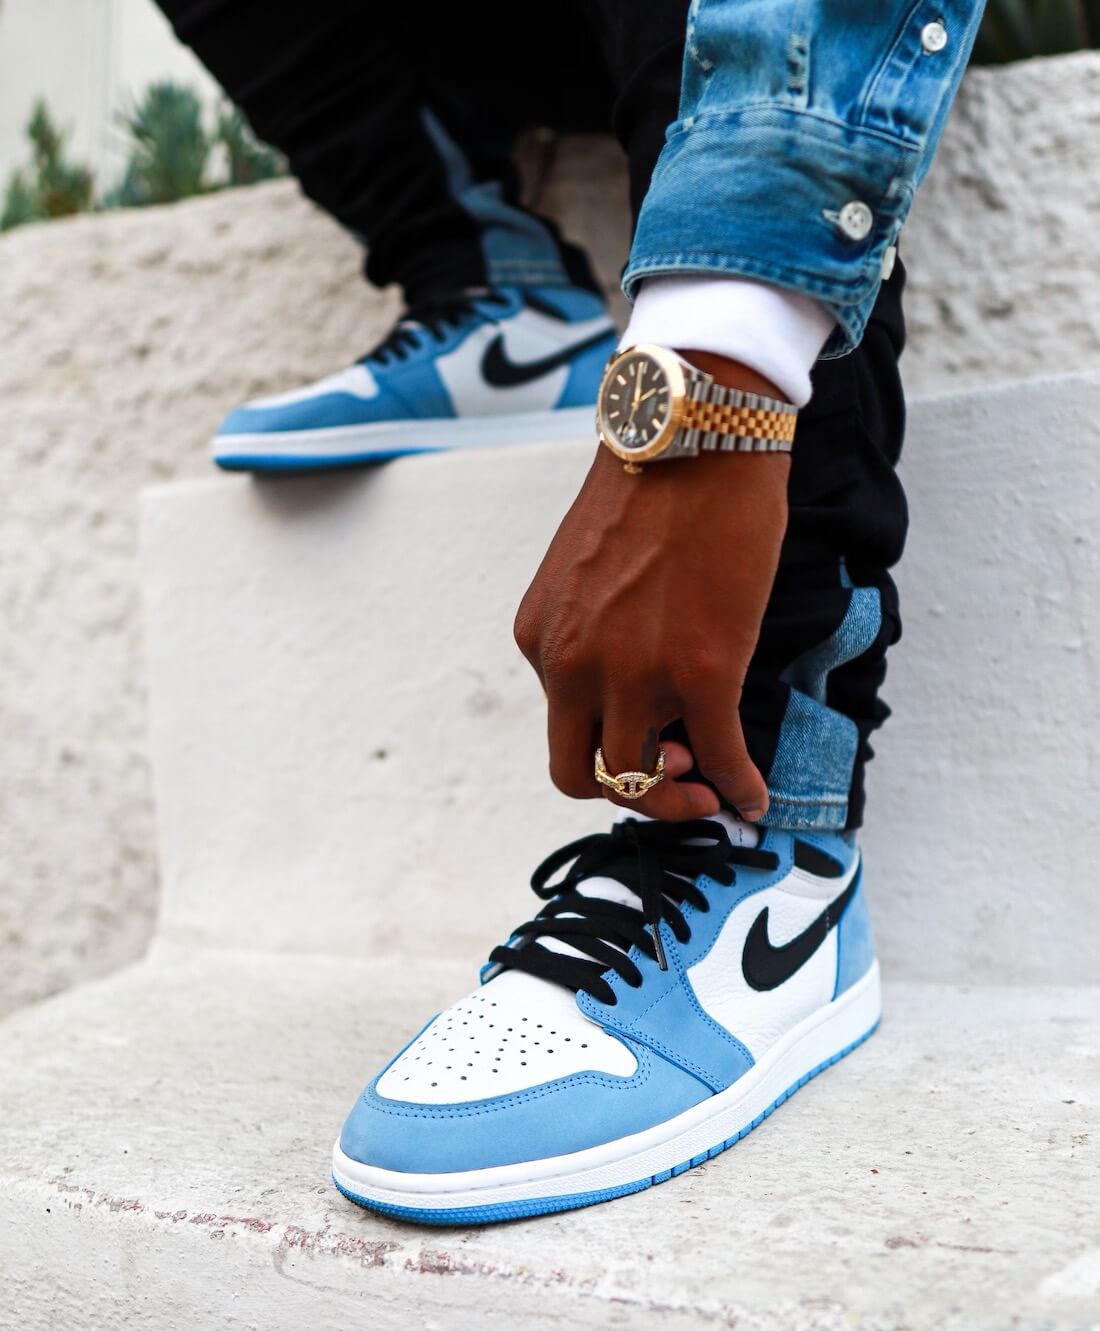 Shift in Style: Why Are People Moving Away From the Air Jordan 1?